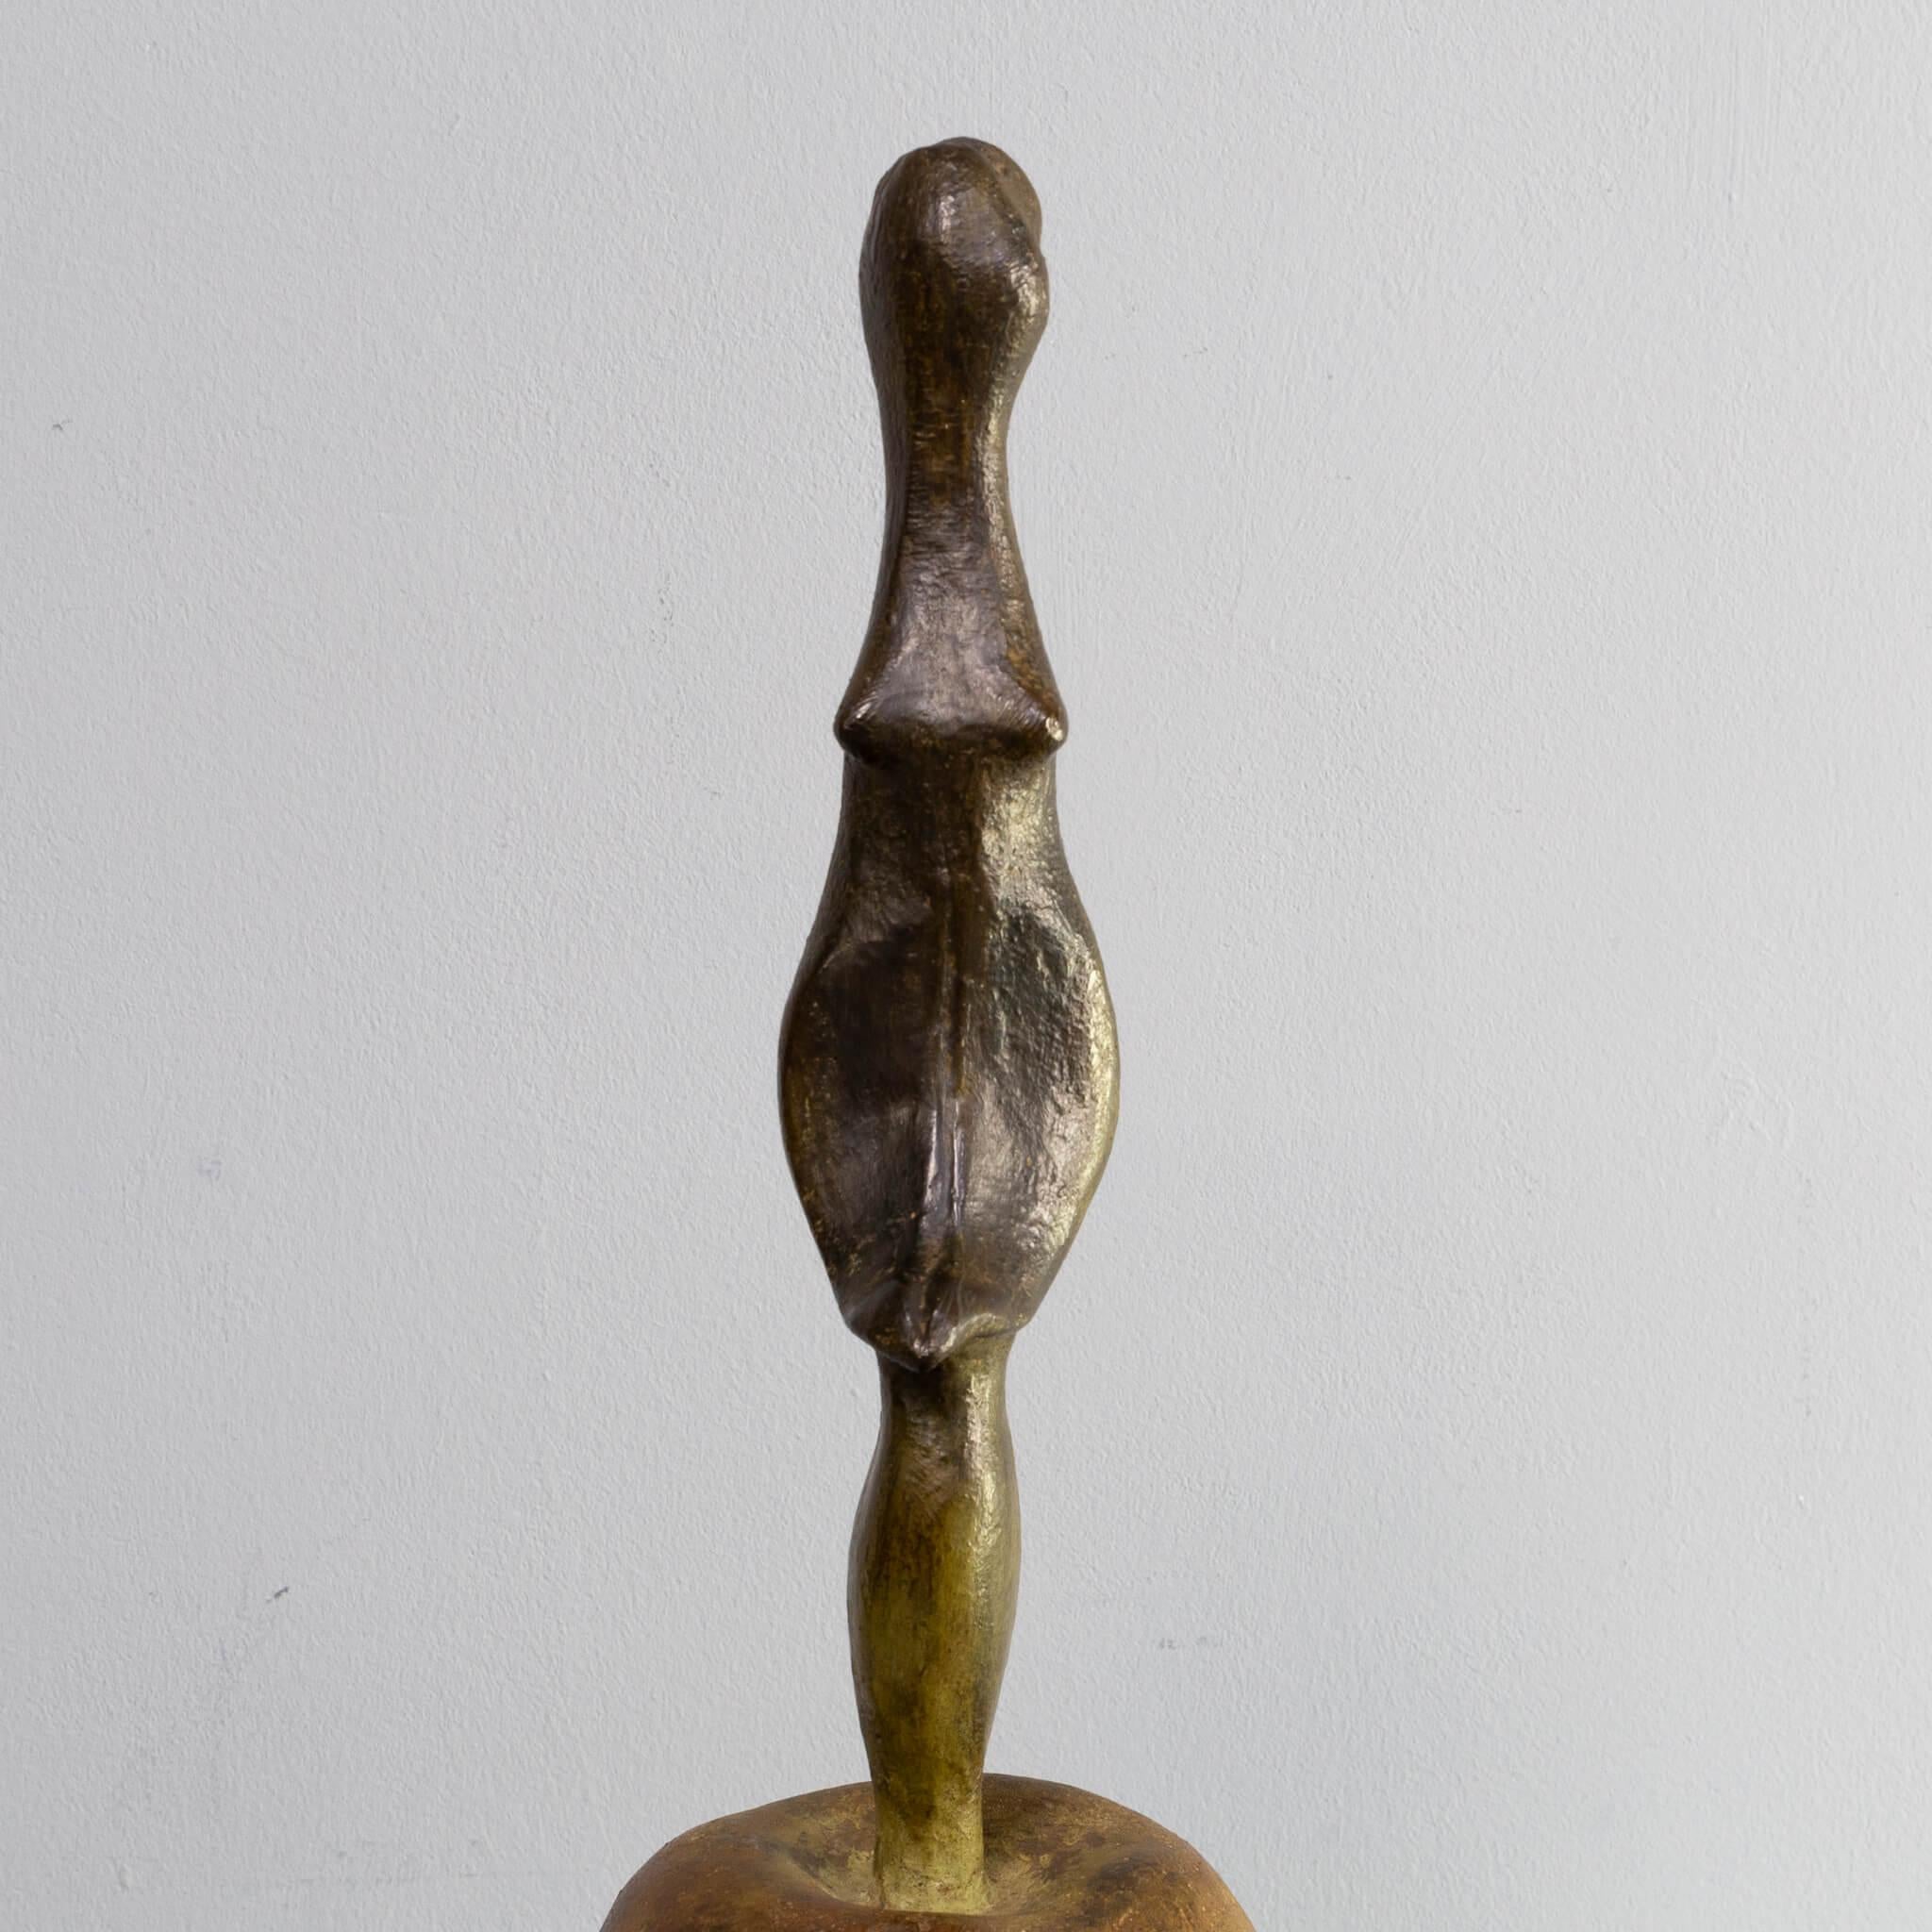 Godfried Pieters Sculpture ‘Abstract Woman on a Ball’ In Good Condition For Sale In Amstelveen, Noord